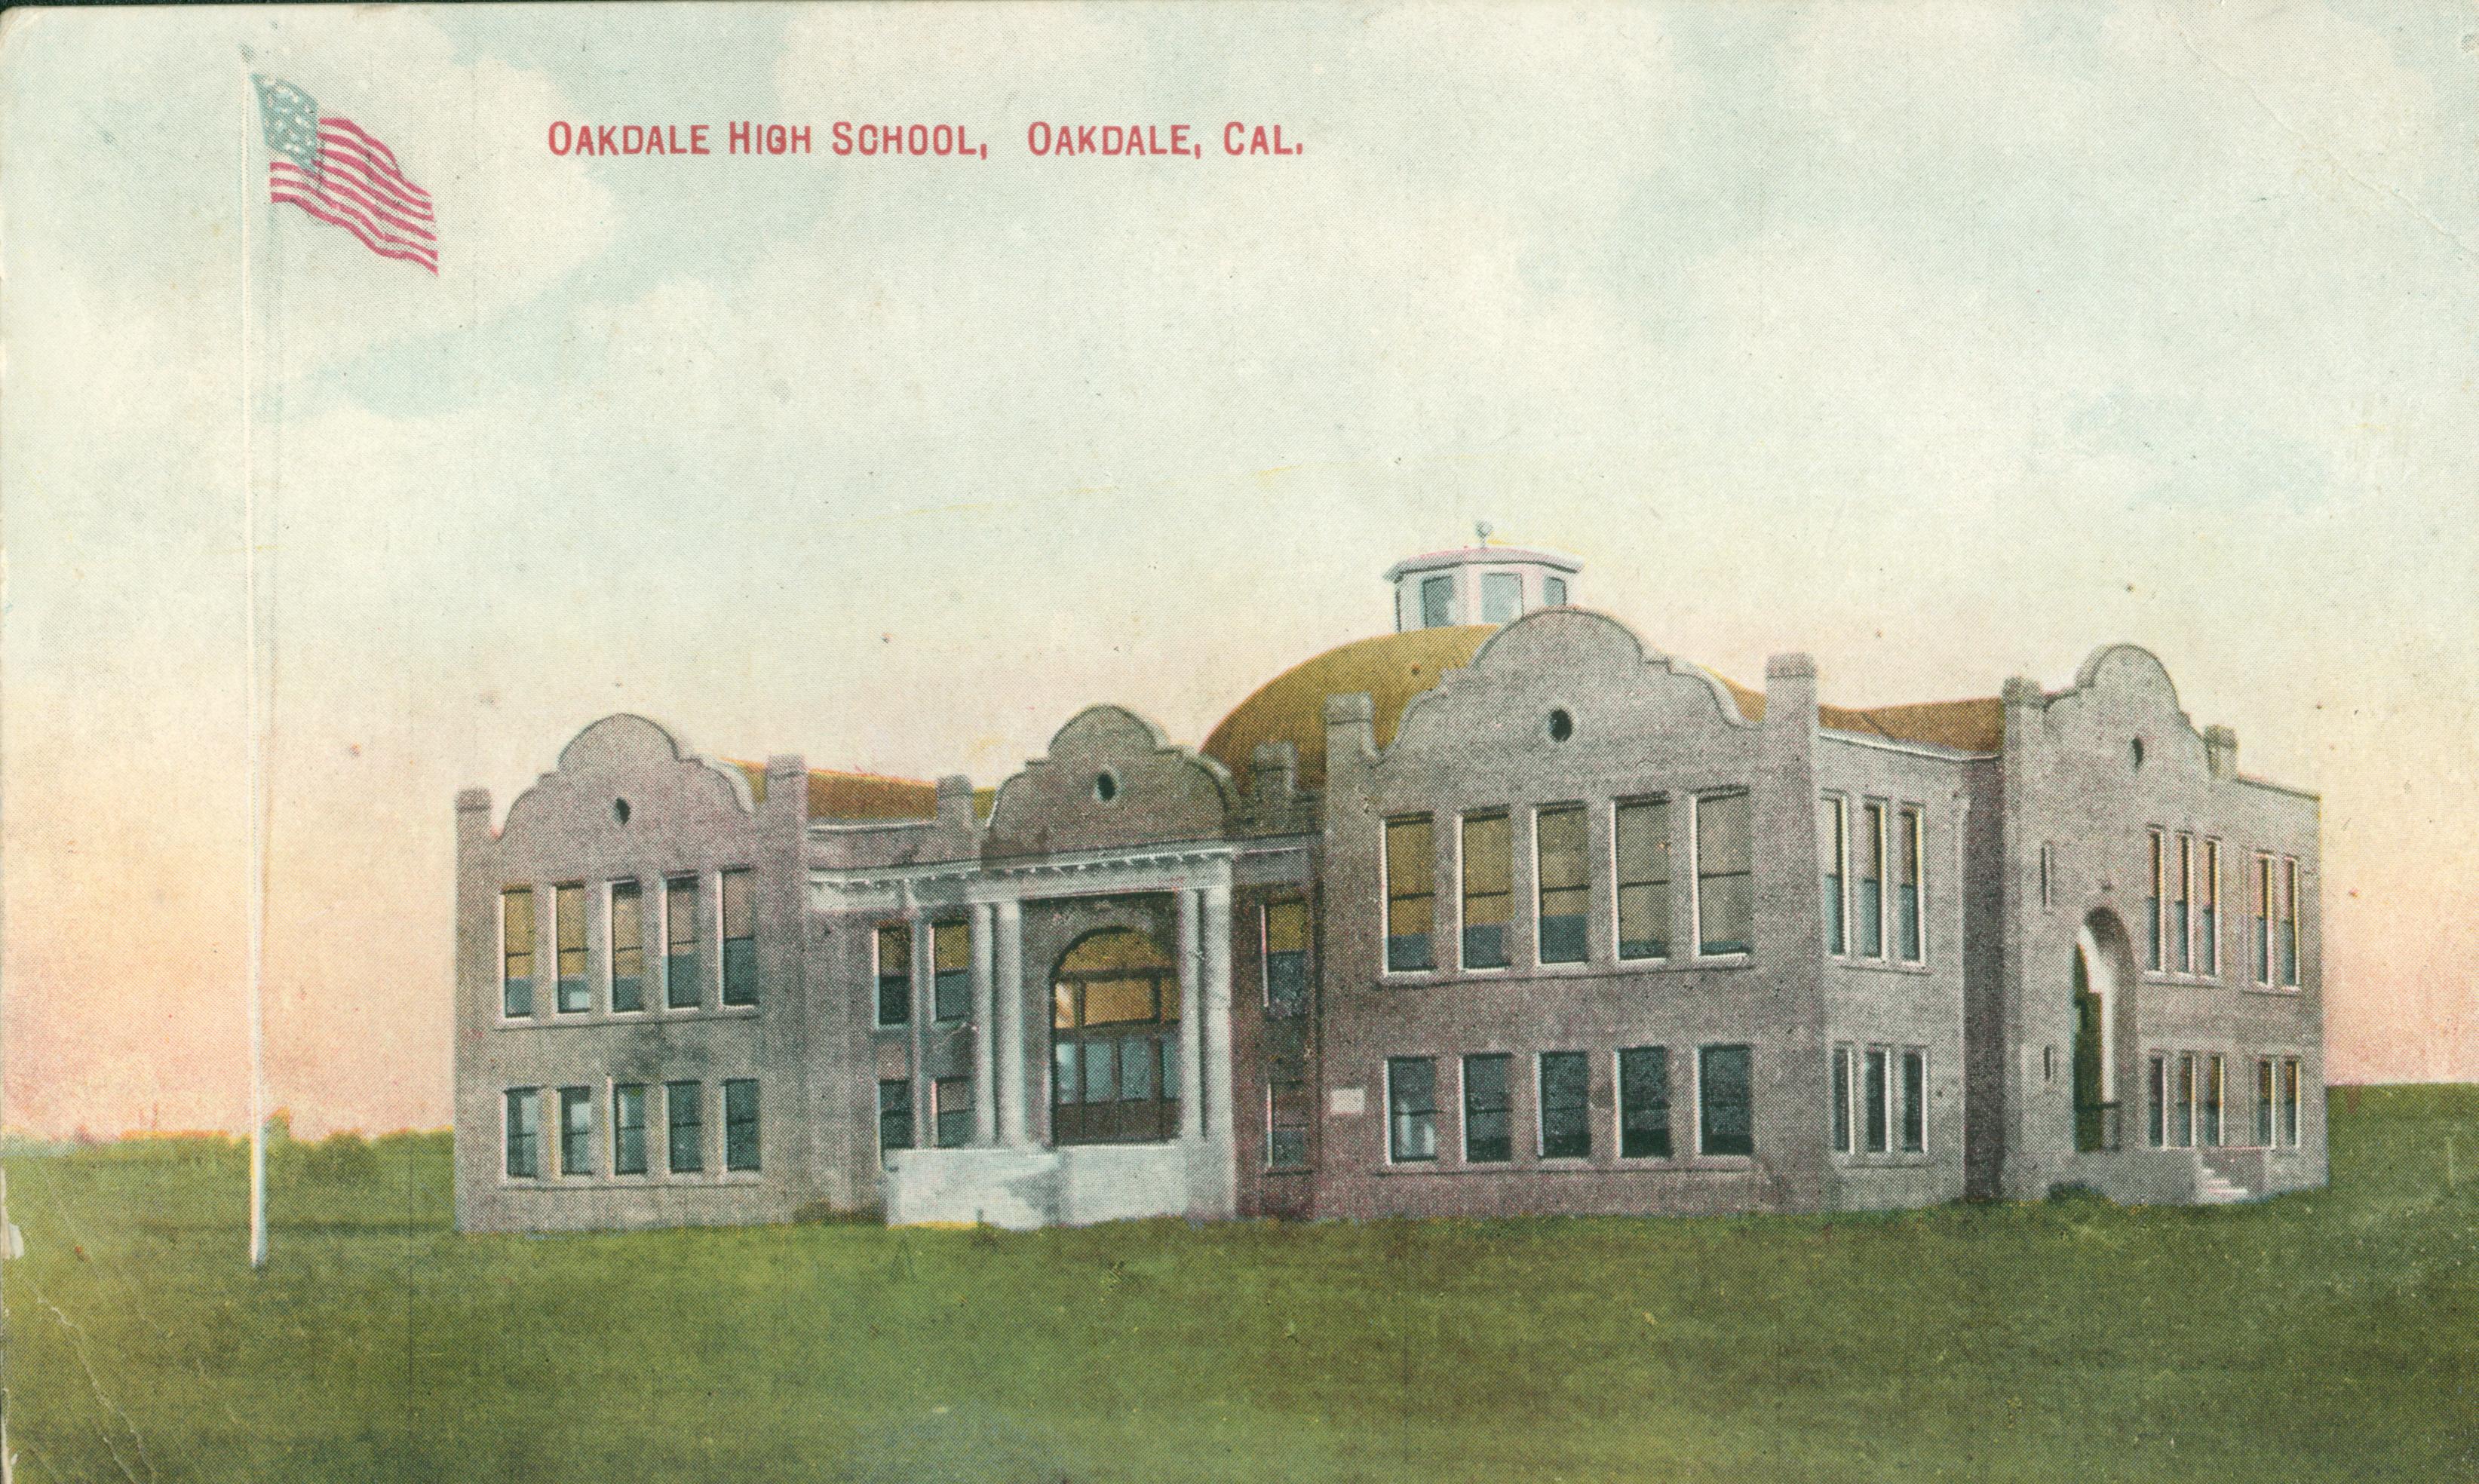 Shows a corner view of Oakdale High School in the middle of an open field with a flag pole out front